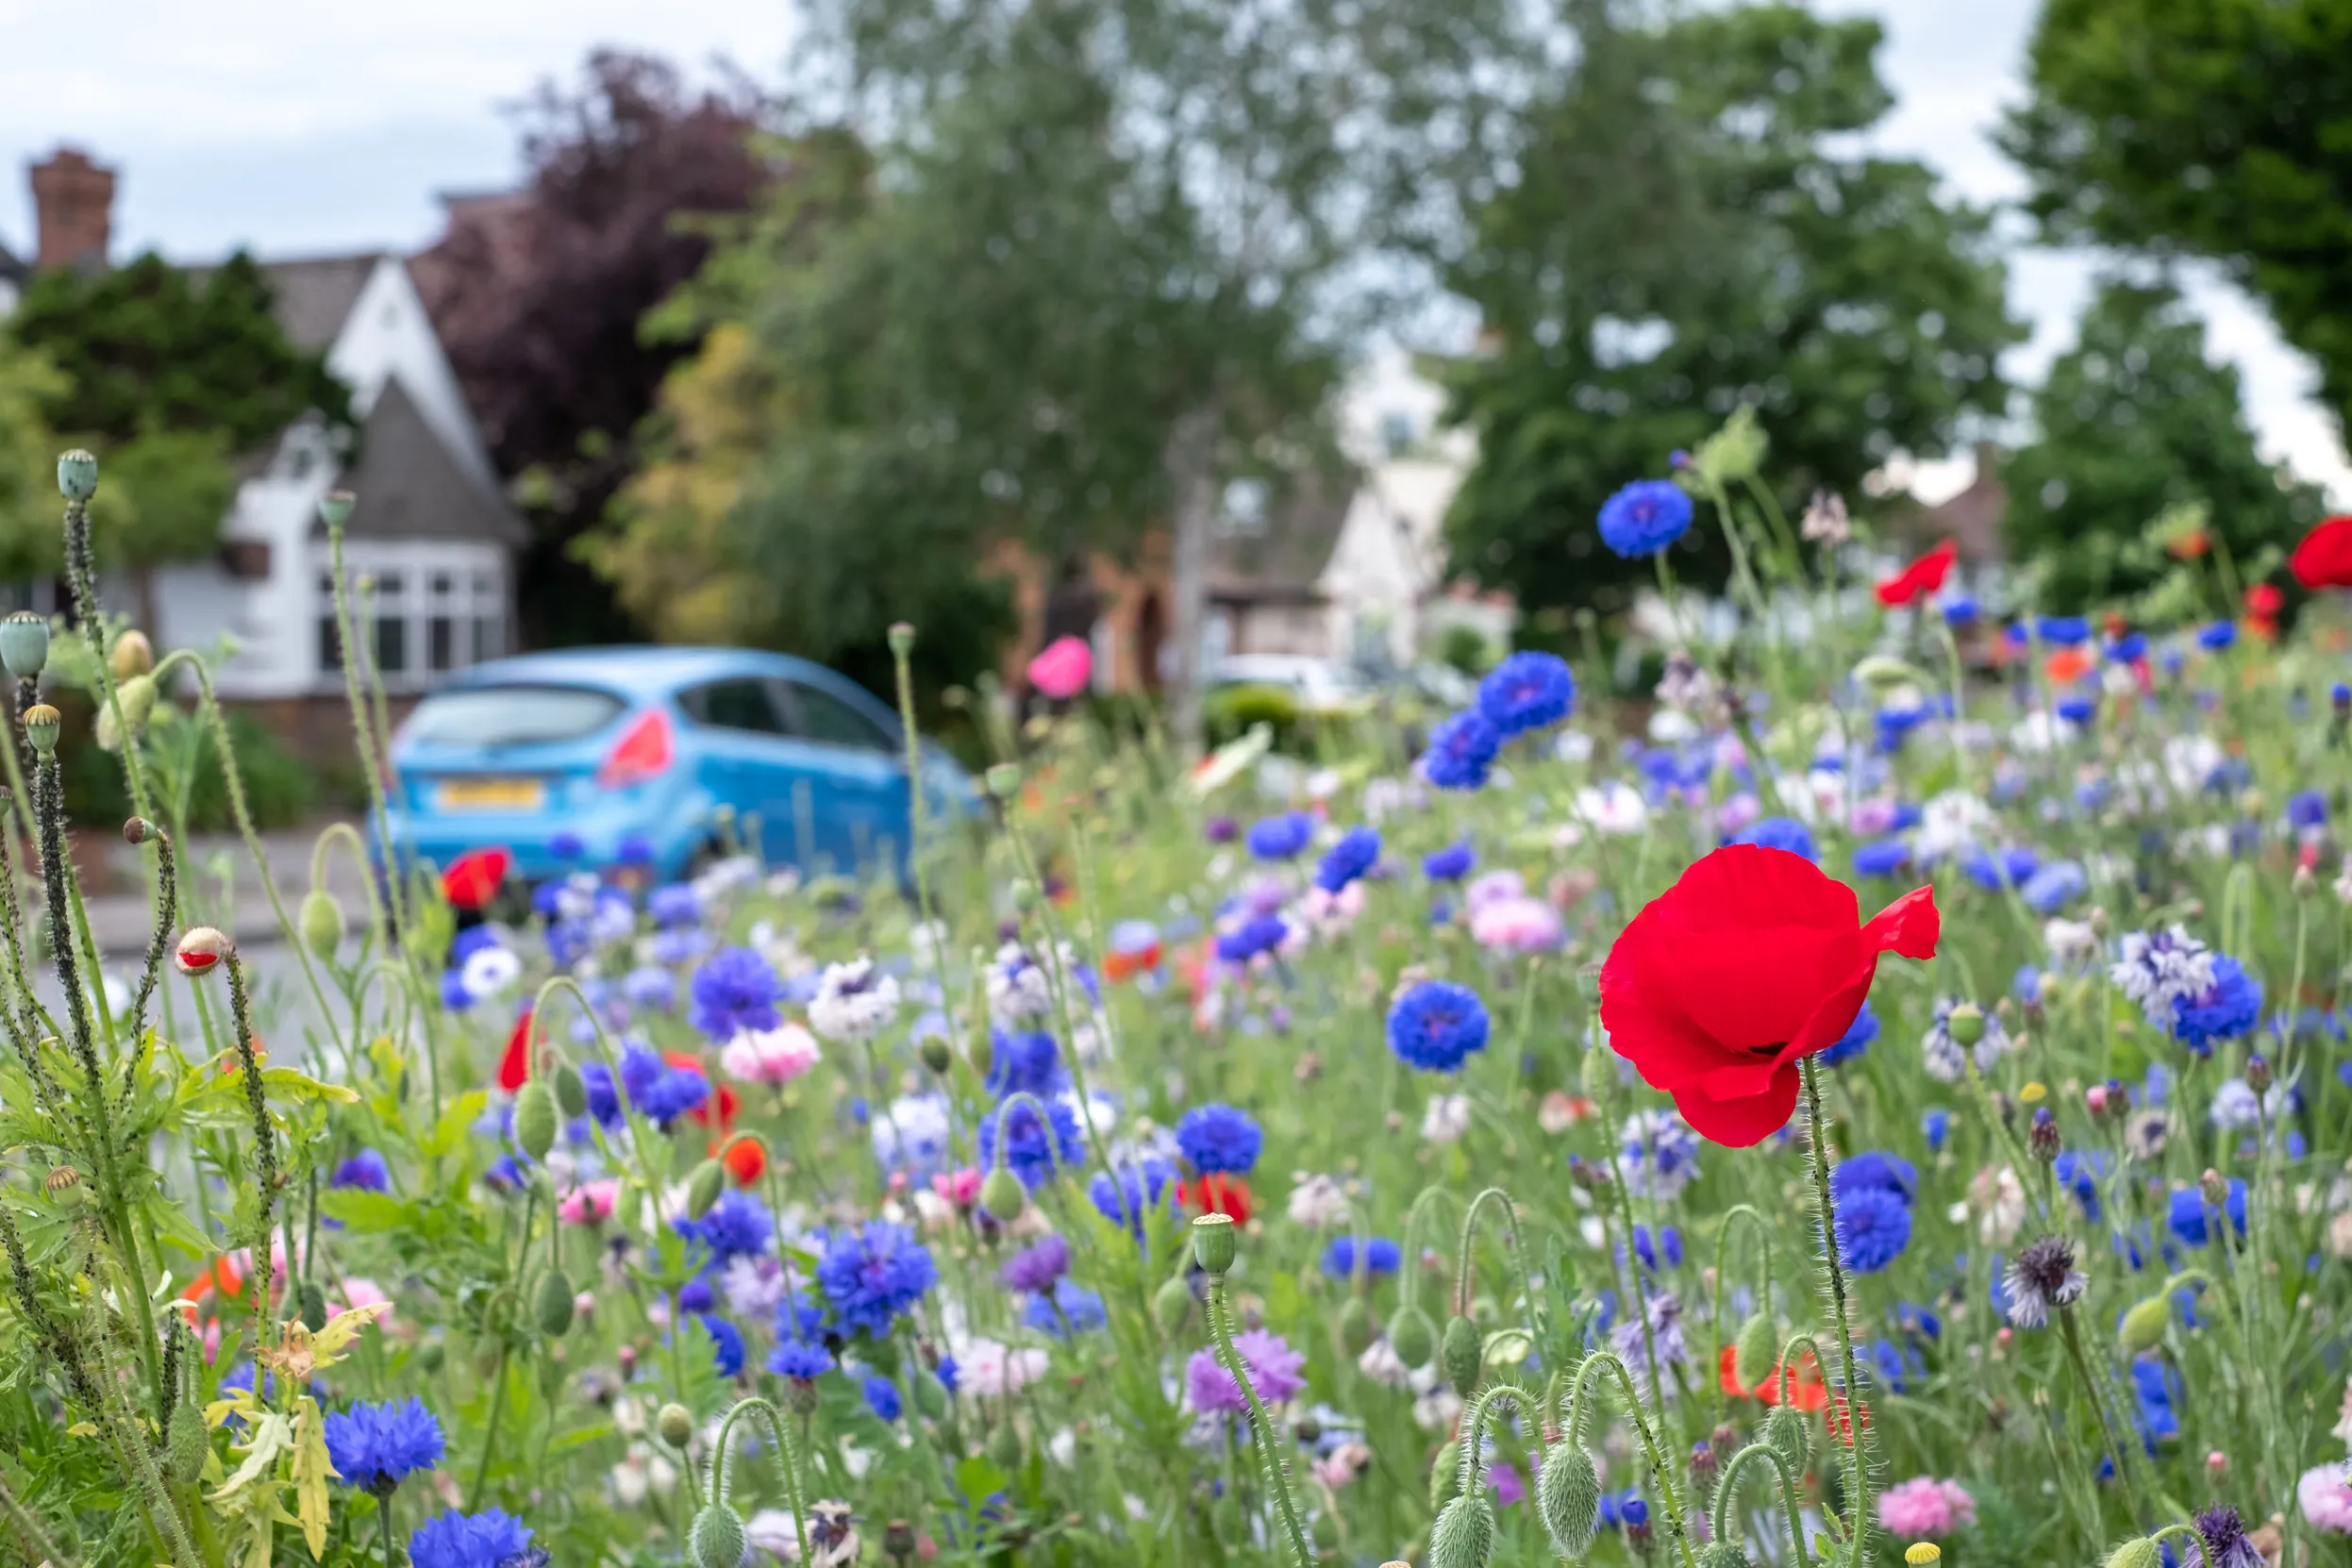 A patch of wildflowers in the foreground with a house and parked car in the background.